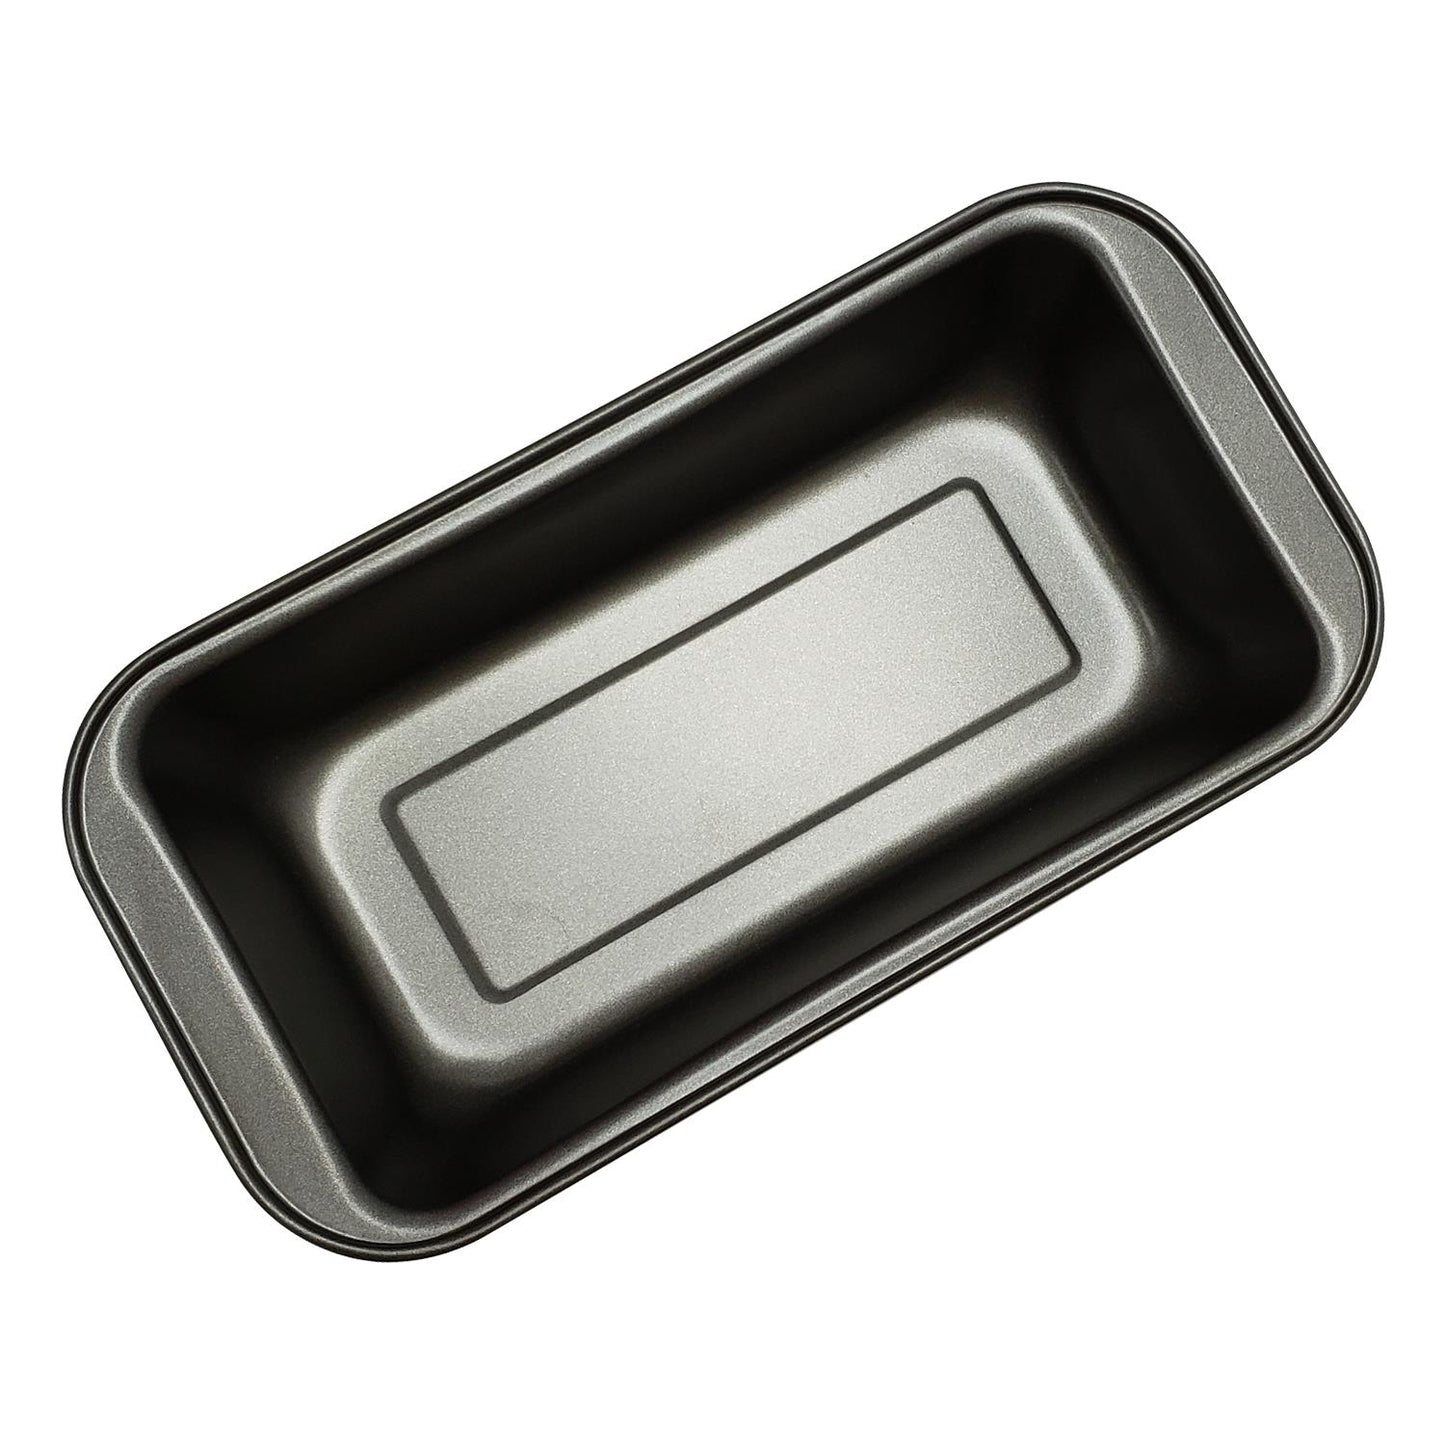 8.66 X 4.6 X 2.28INCH LOAF PAN